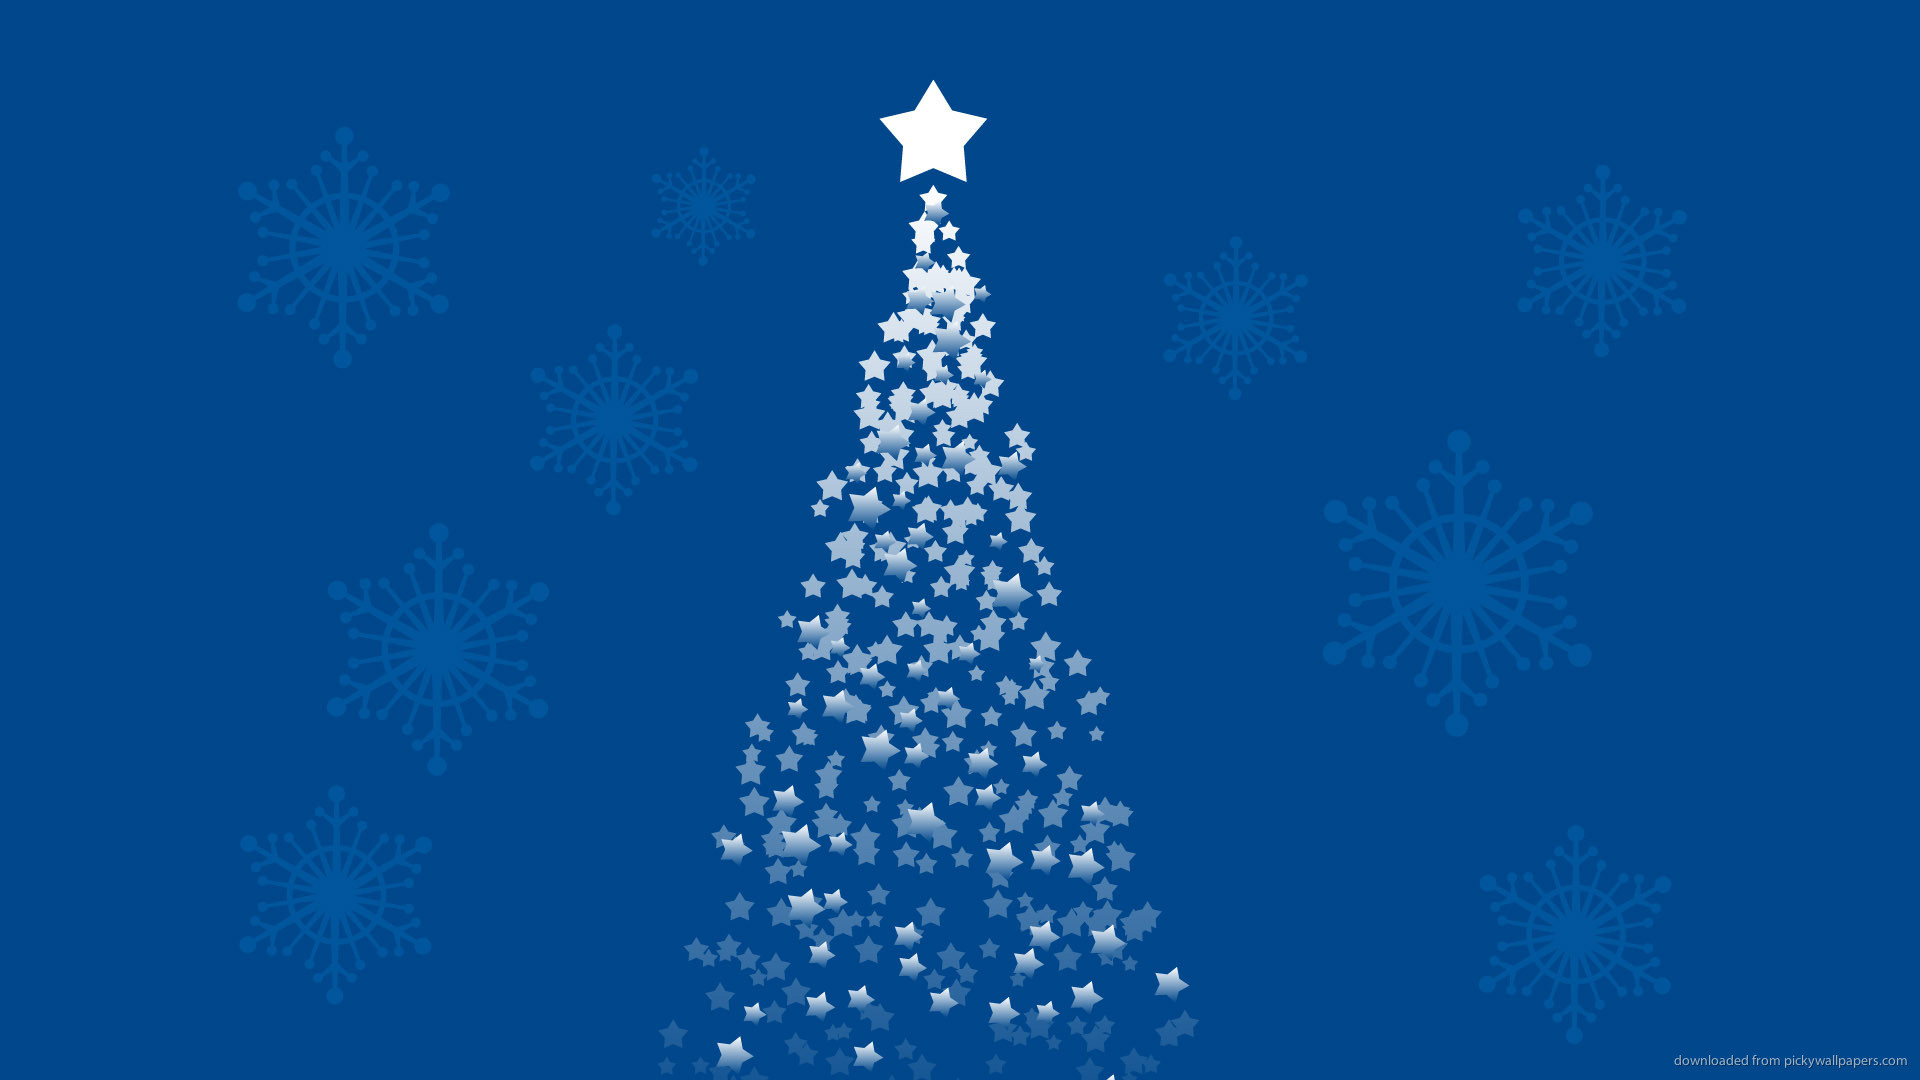 1920x1080 Ascending star forming a Christmas tree on a blue background picture